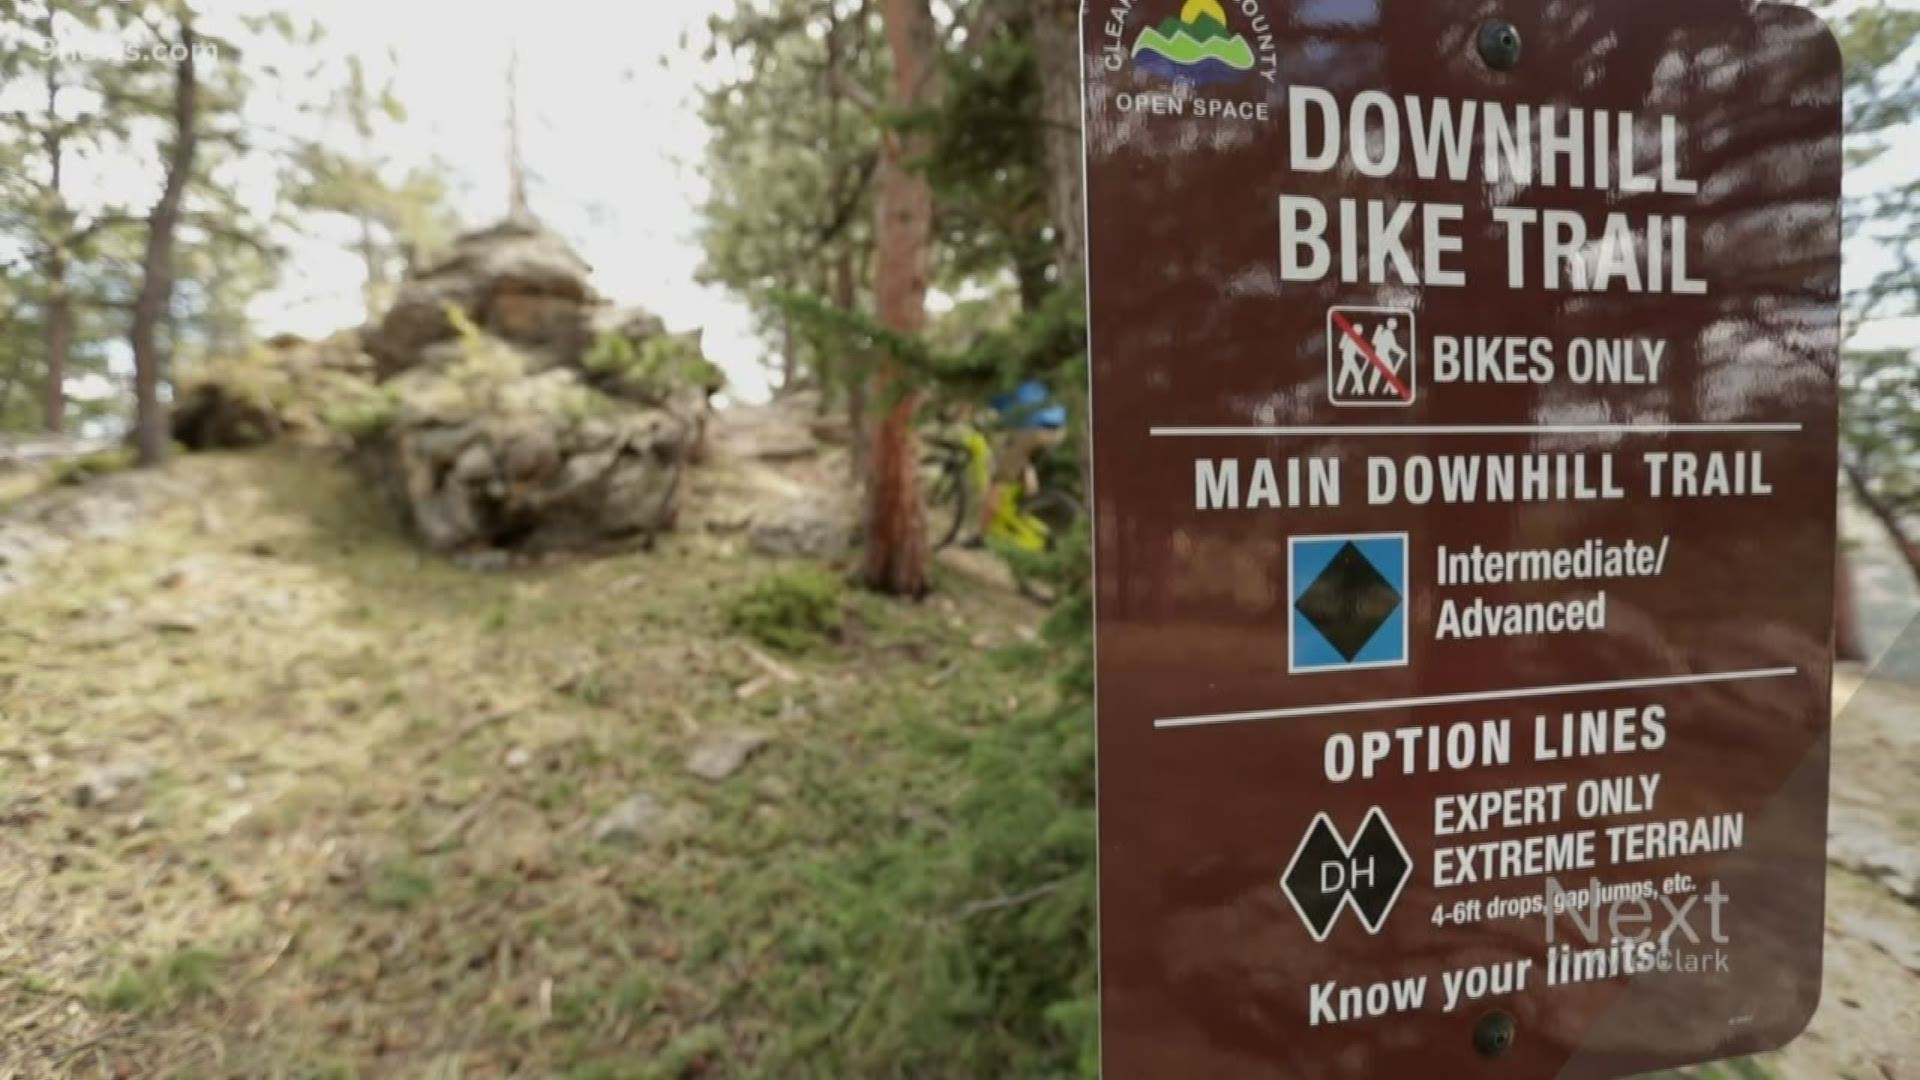 The first purpose-built, downhill mountain bike-only trail in the Front Range opened in Clear Creek County recently. It's called The Sluice and photojournalist Mike Grady gave it a try.